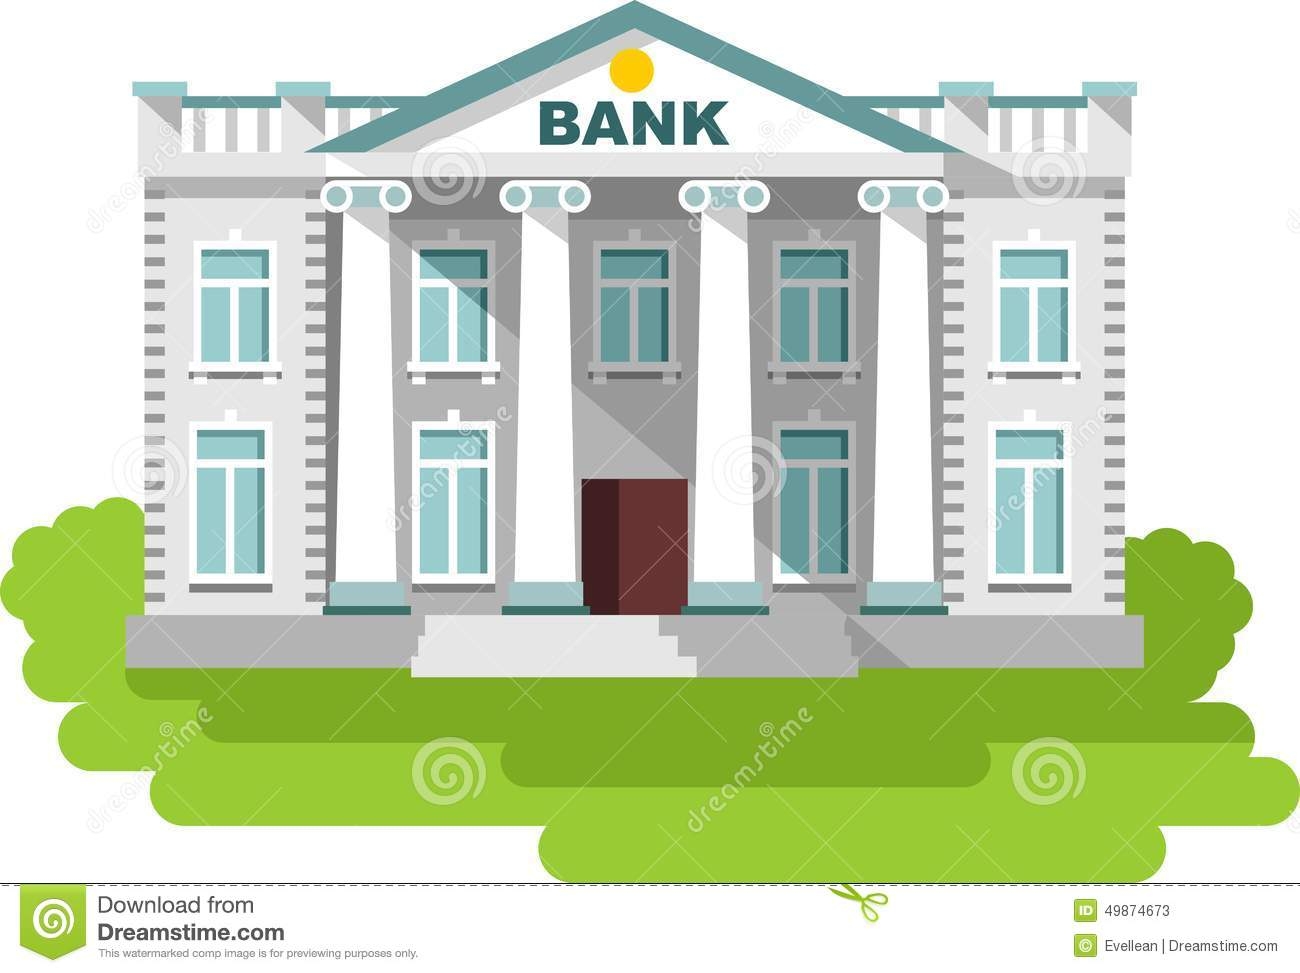 Bank building clipart clipart images gallery for free.